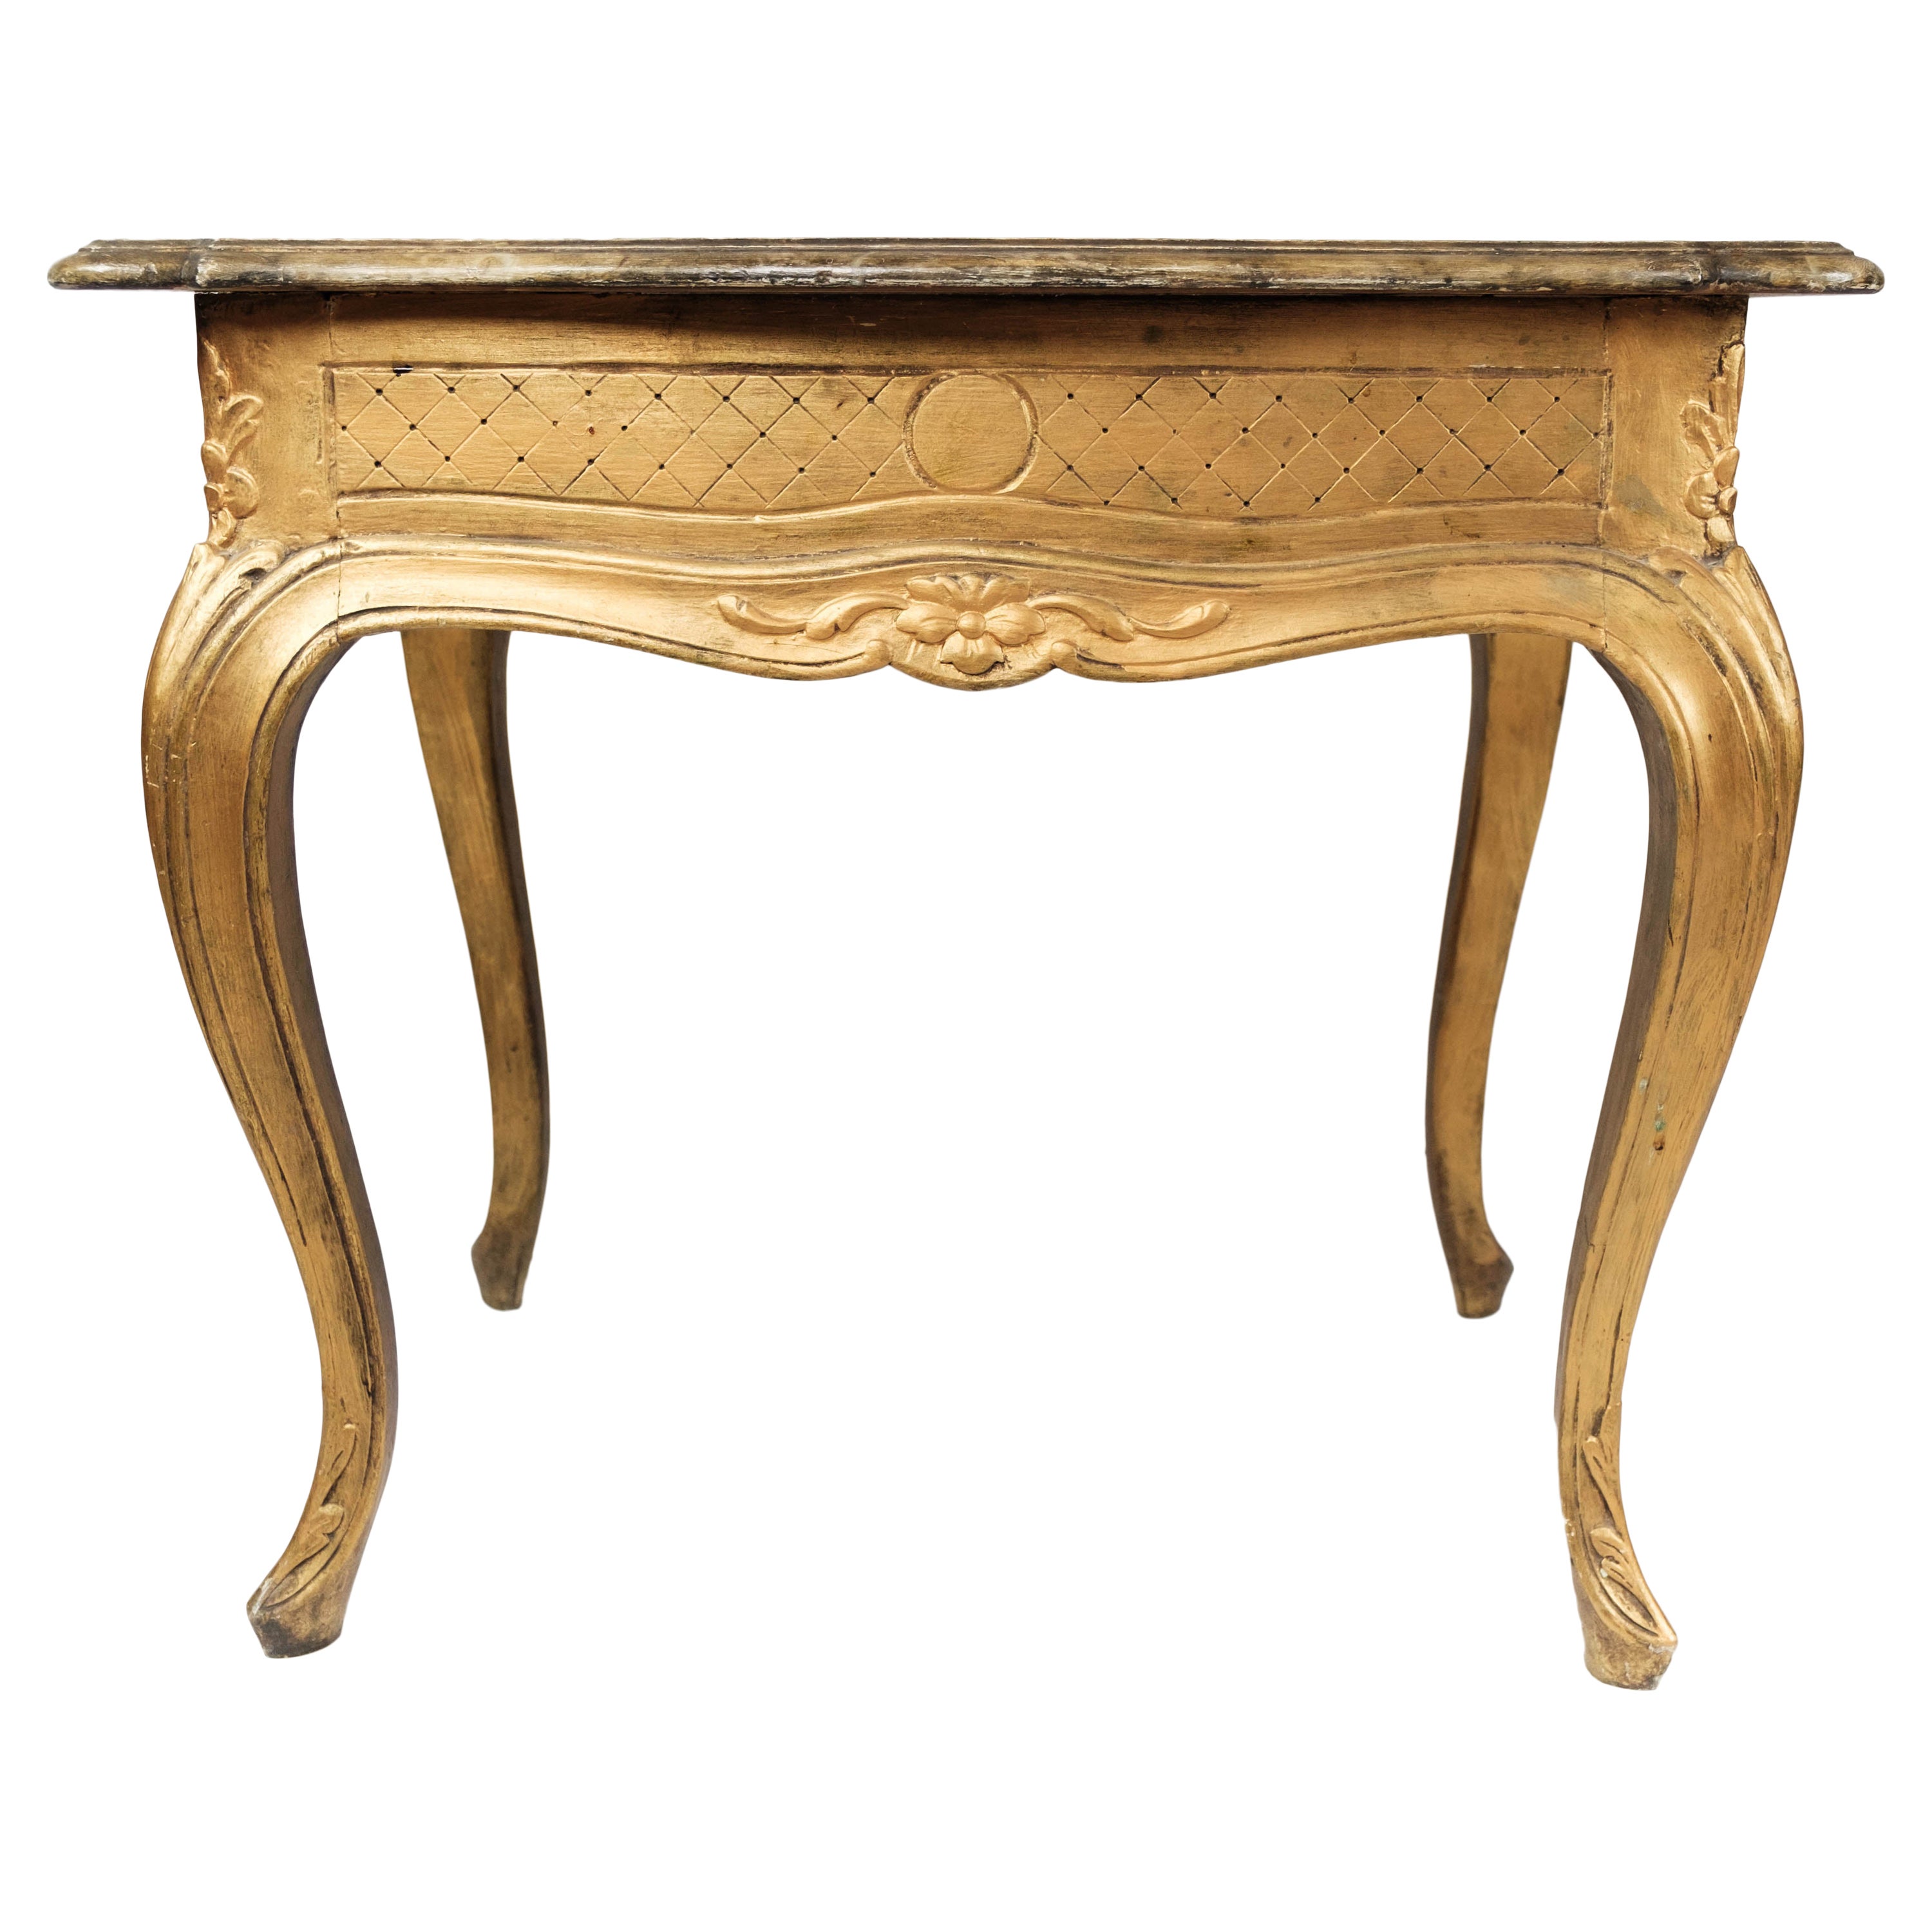 Rococo Revival Side Table with Marbled Tabletop and Frame of Gilded Wood, 1860s For Sale